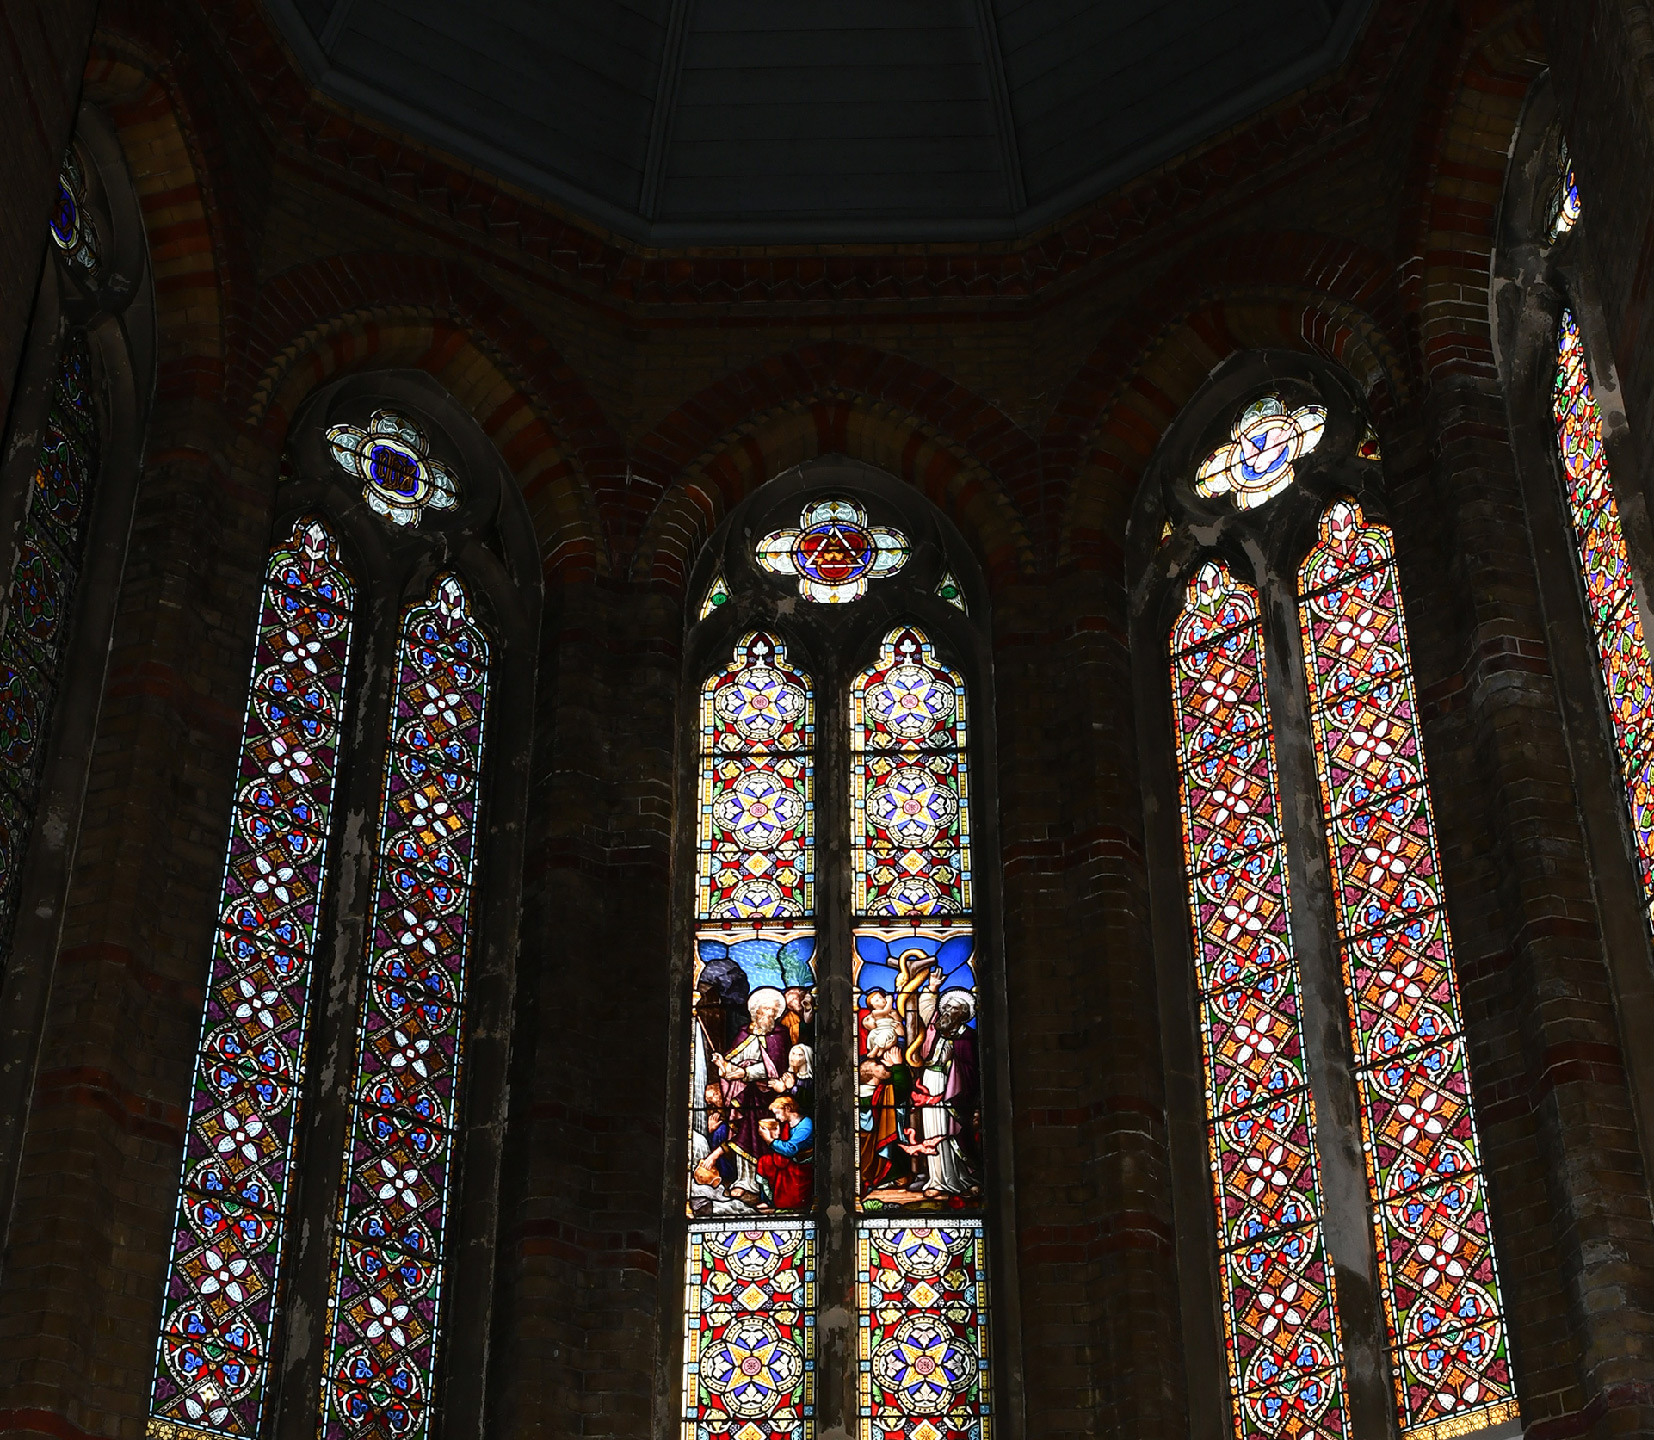 3 of the apse’s stained glass windows backlit and showing their full colour.